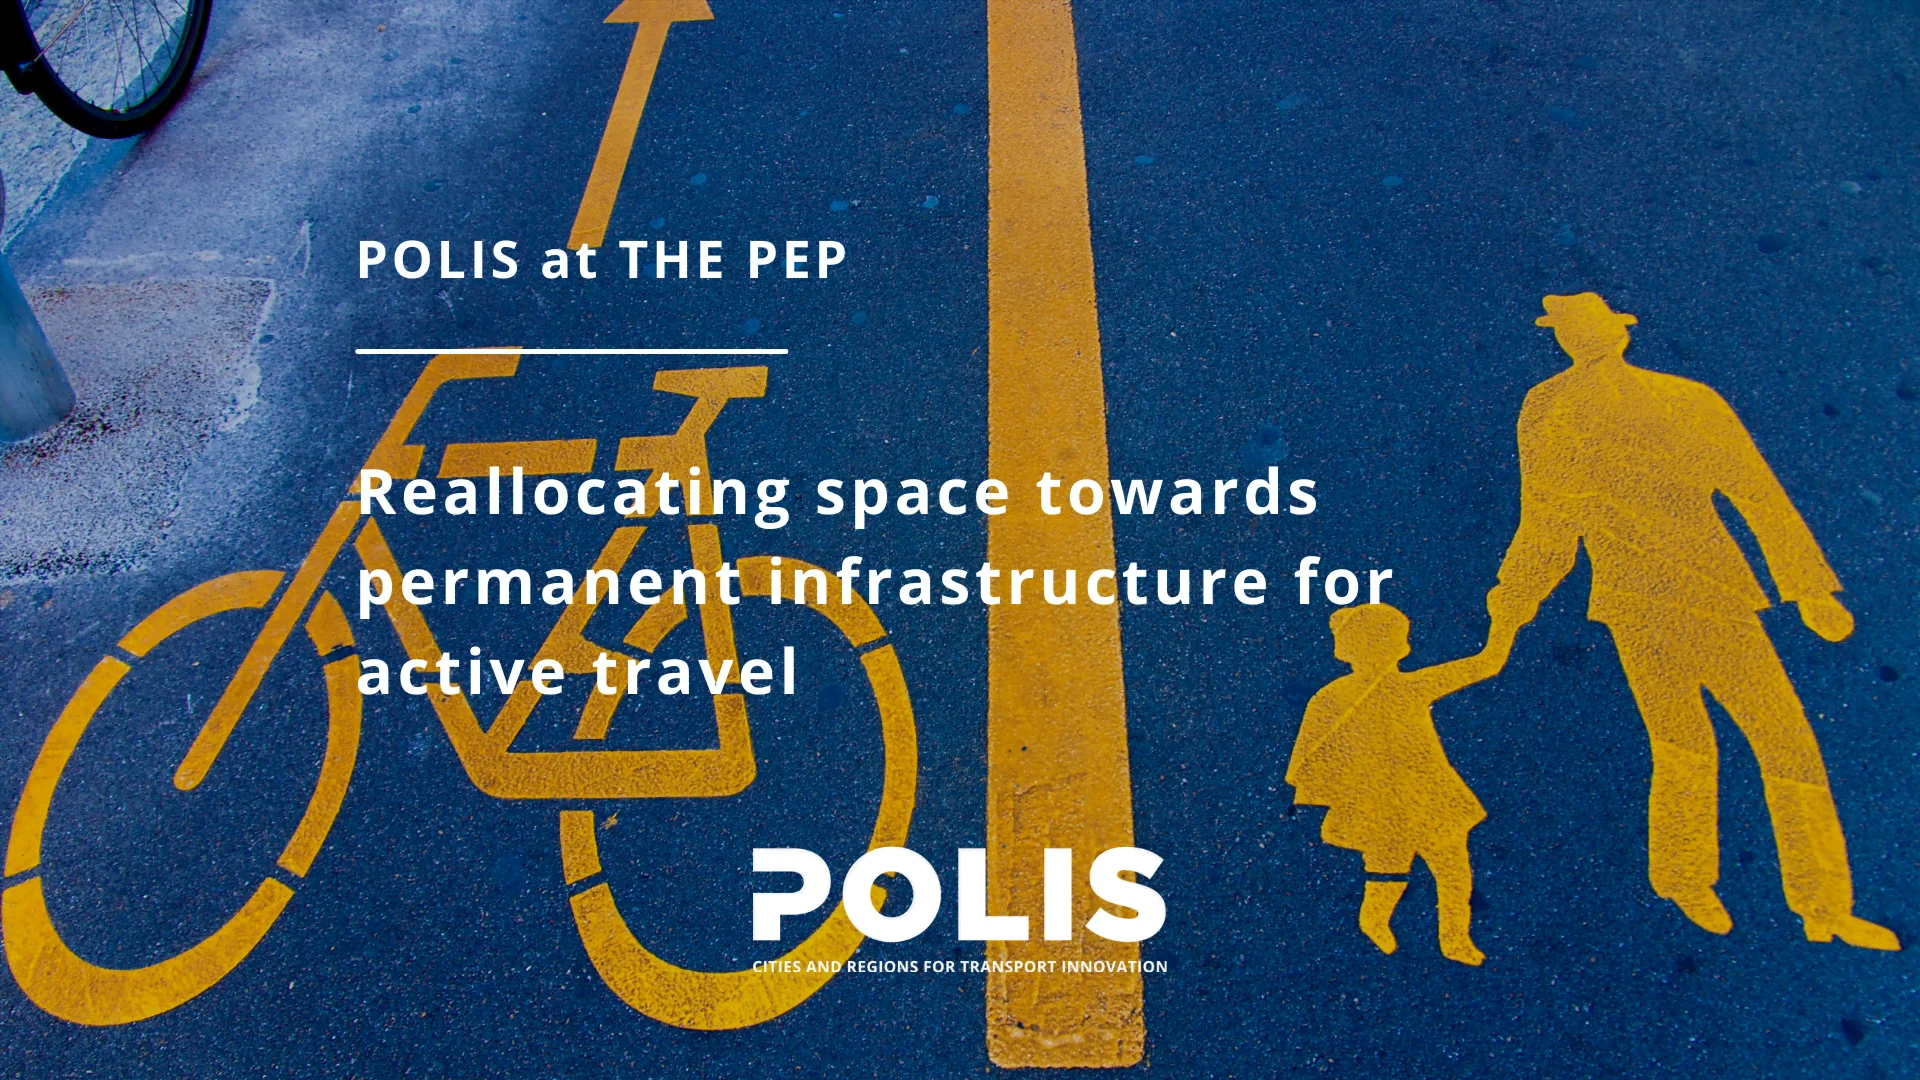 THE PEP: Reallocating space for active travel